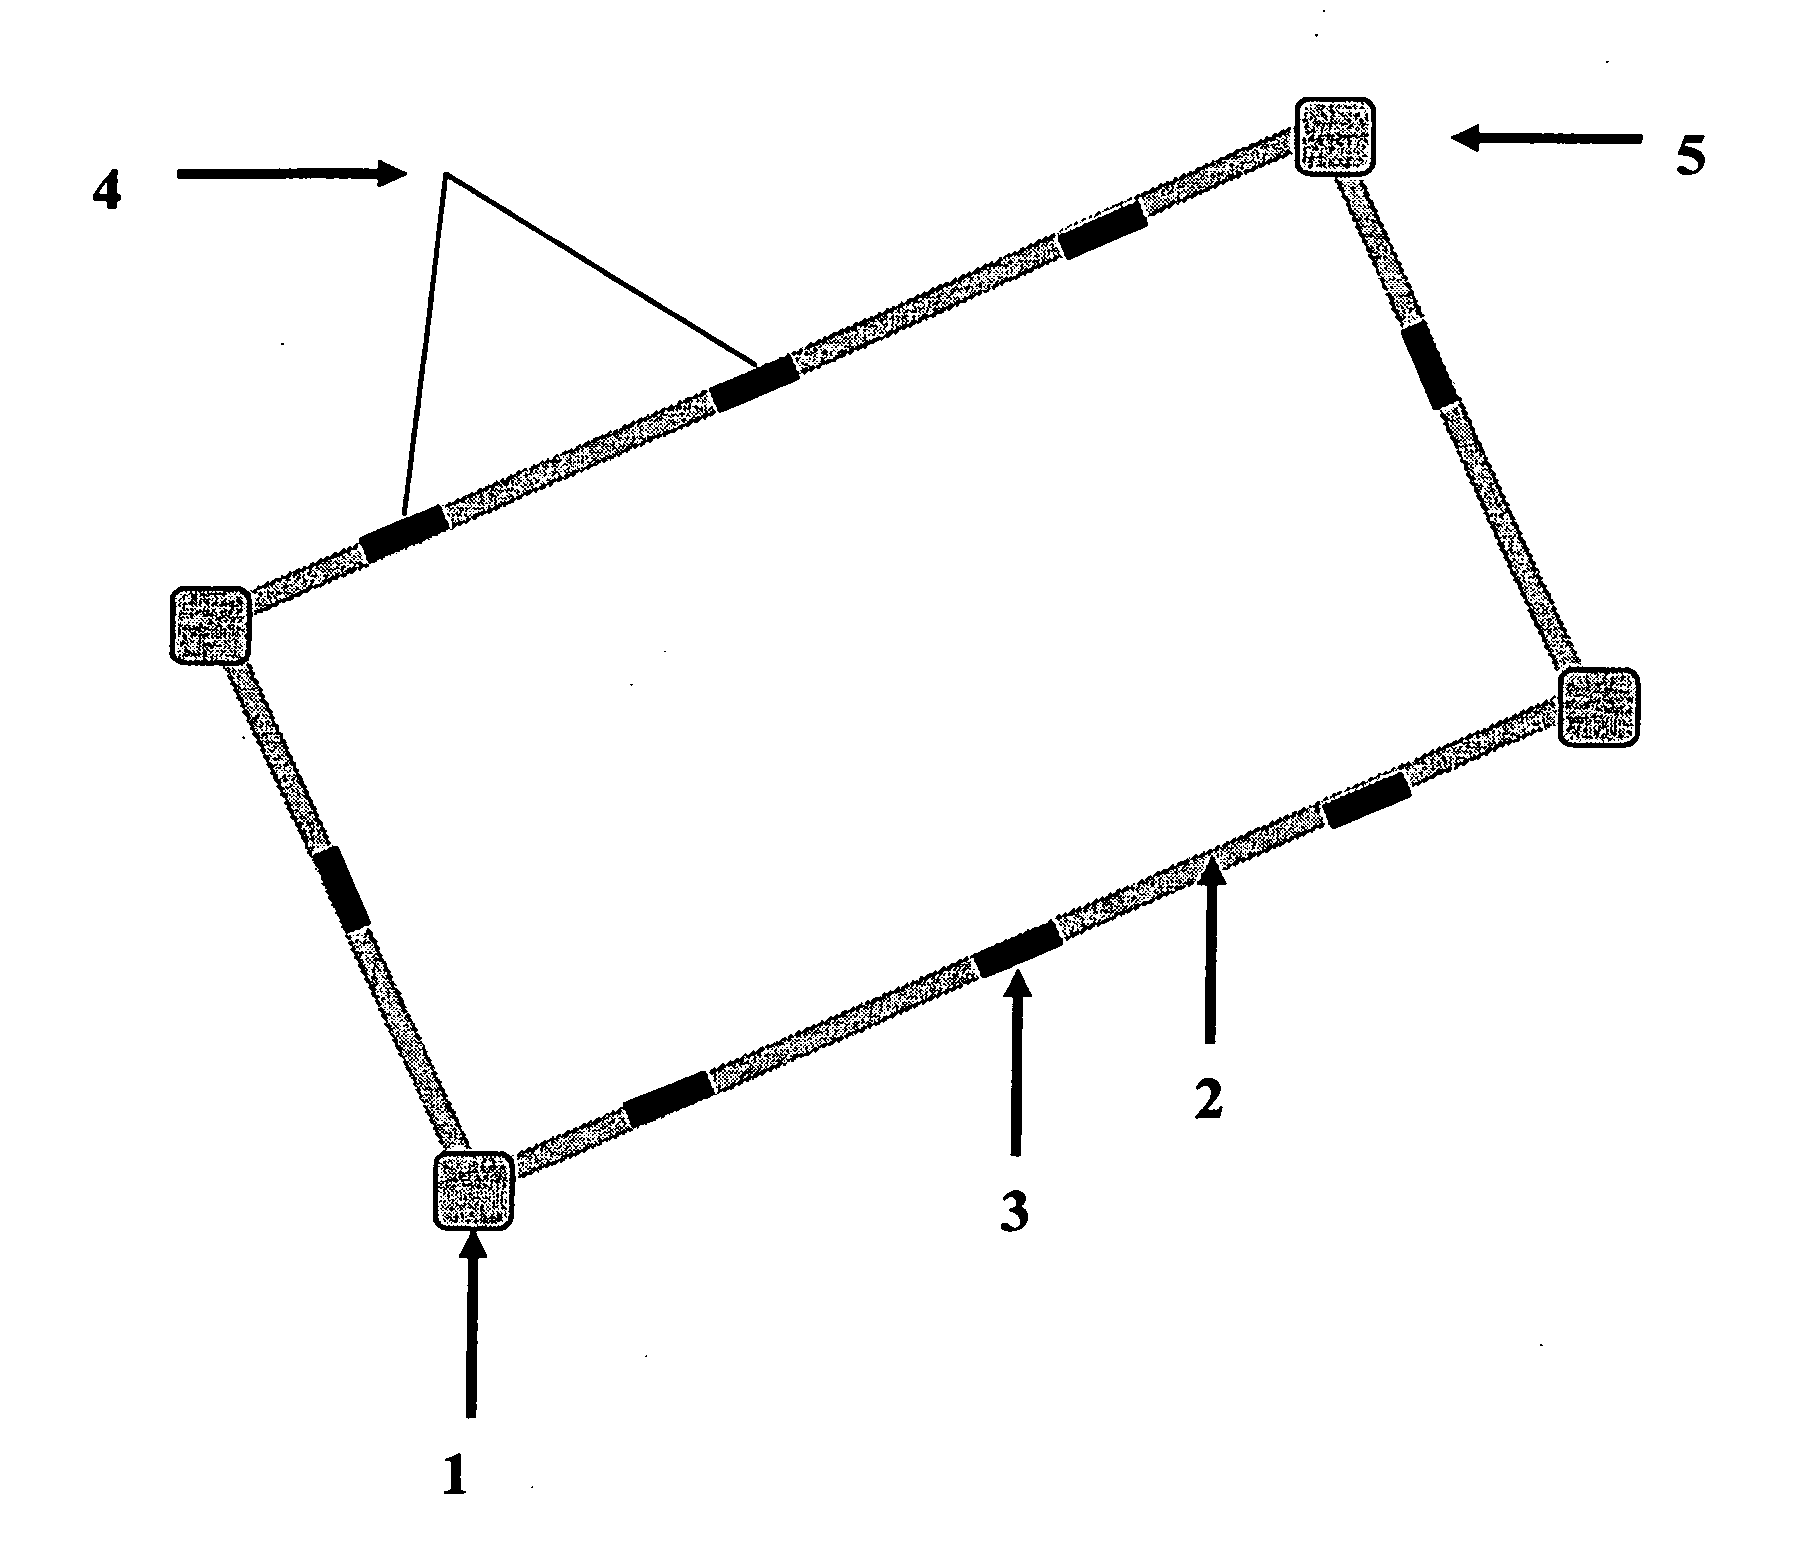 Portable adjustable boundary lines